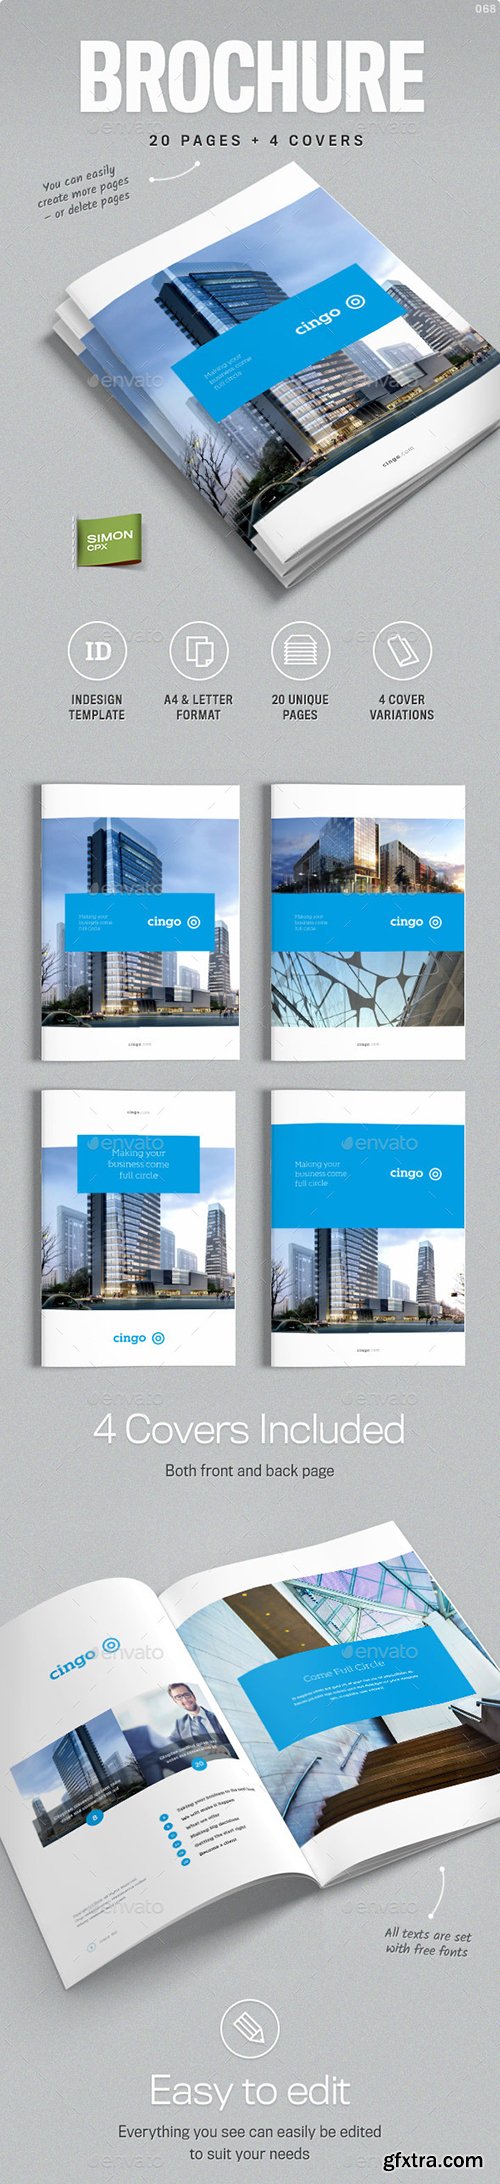 Graphicriver - Brochure Template for Indesign - Cingo 12515783